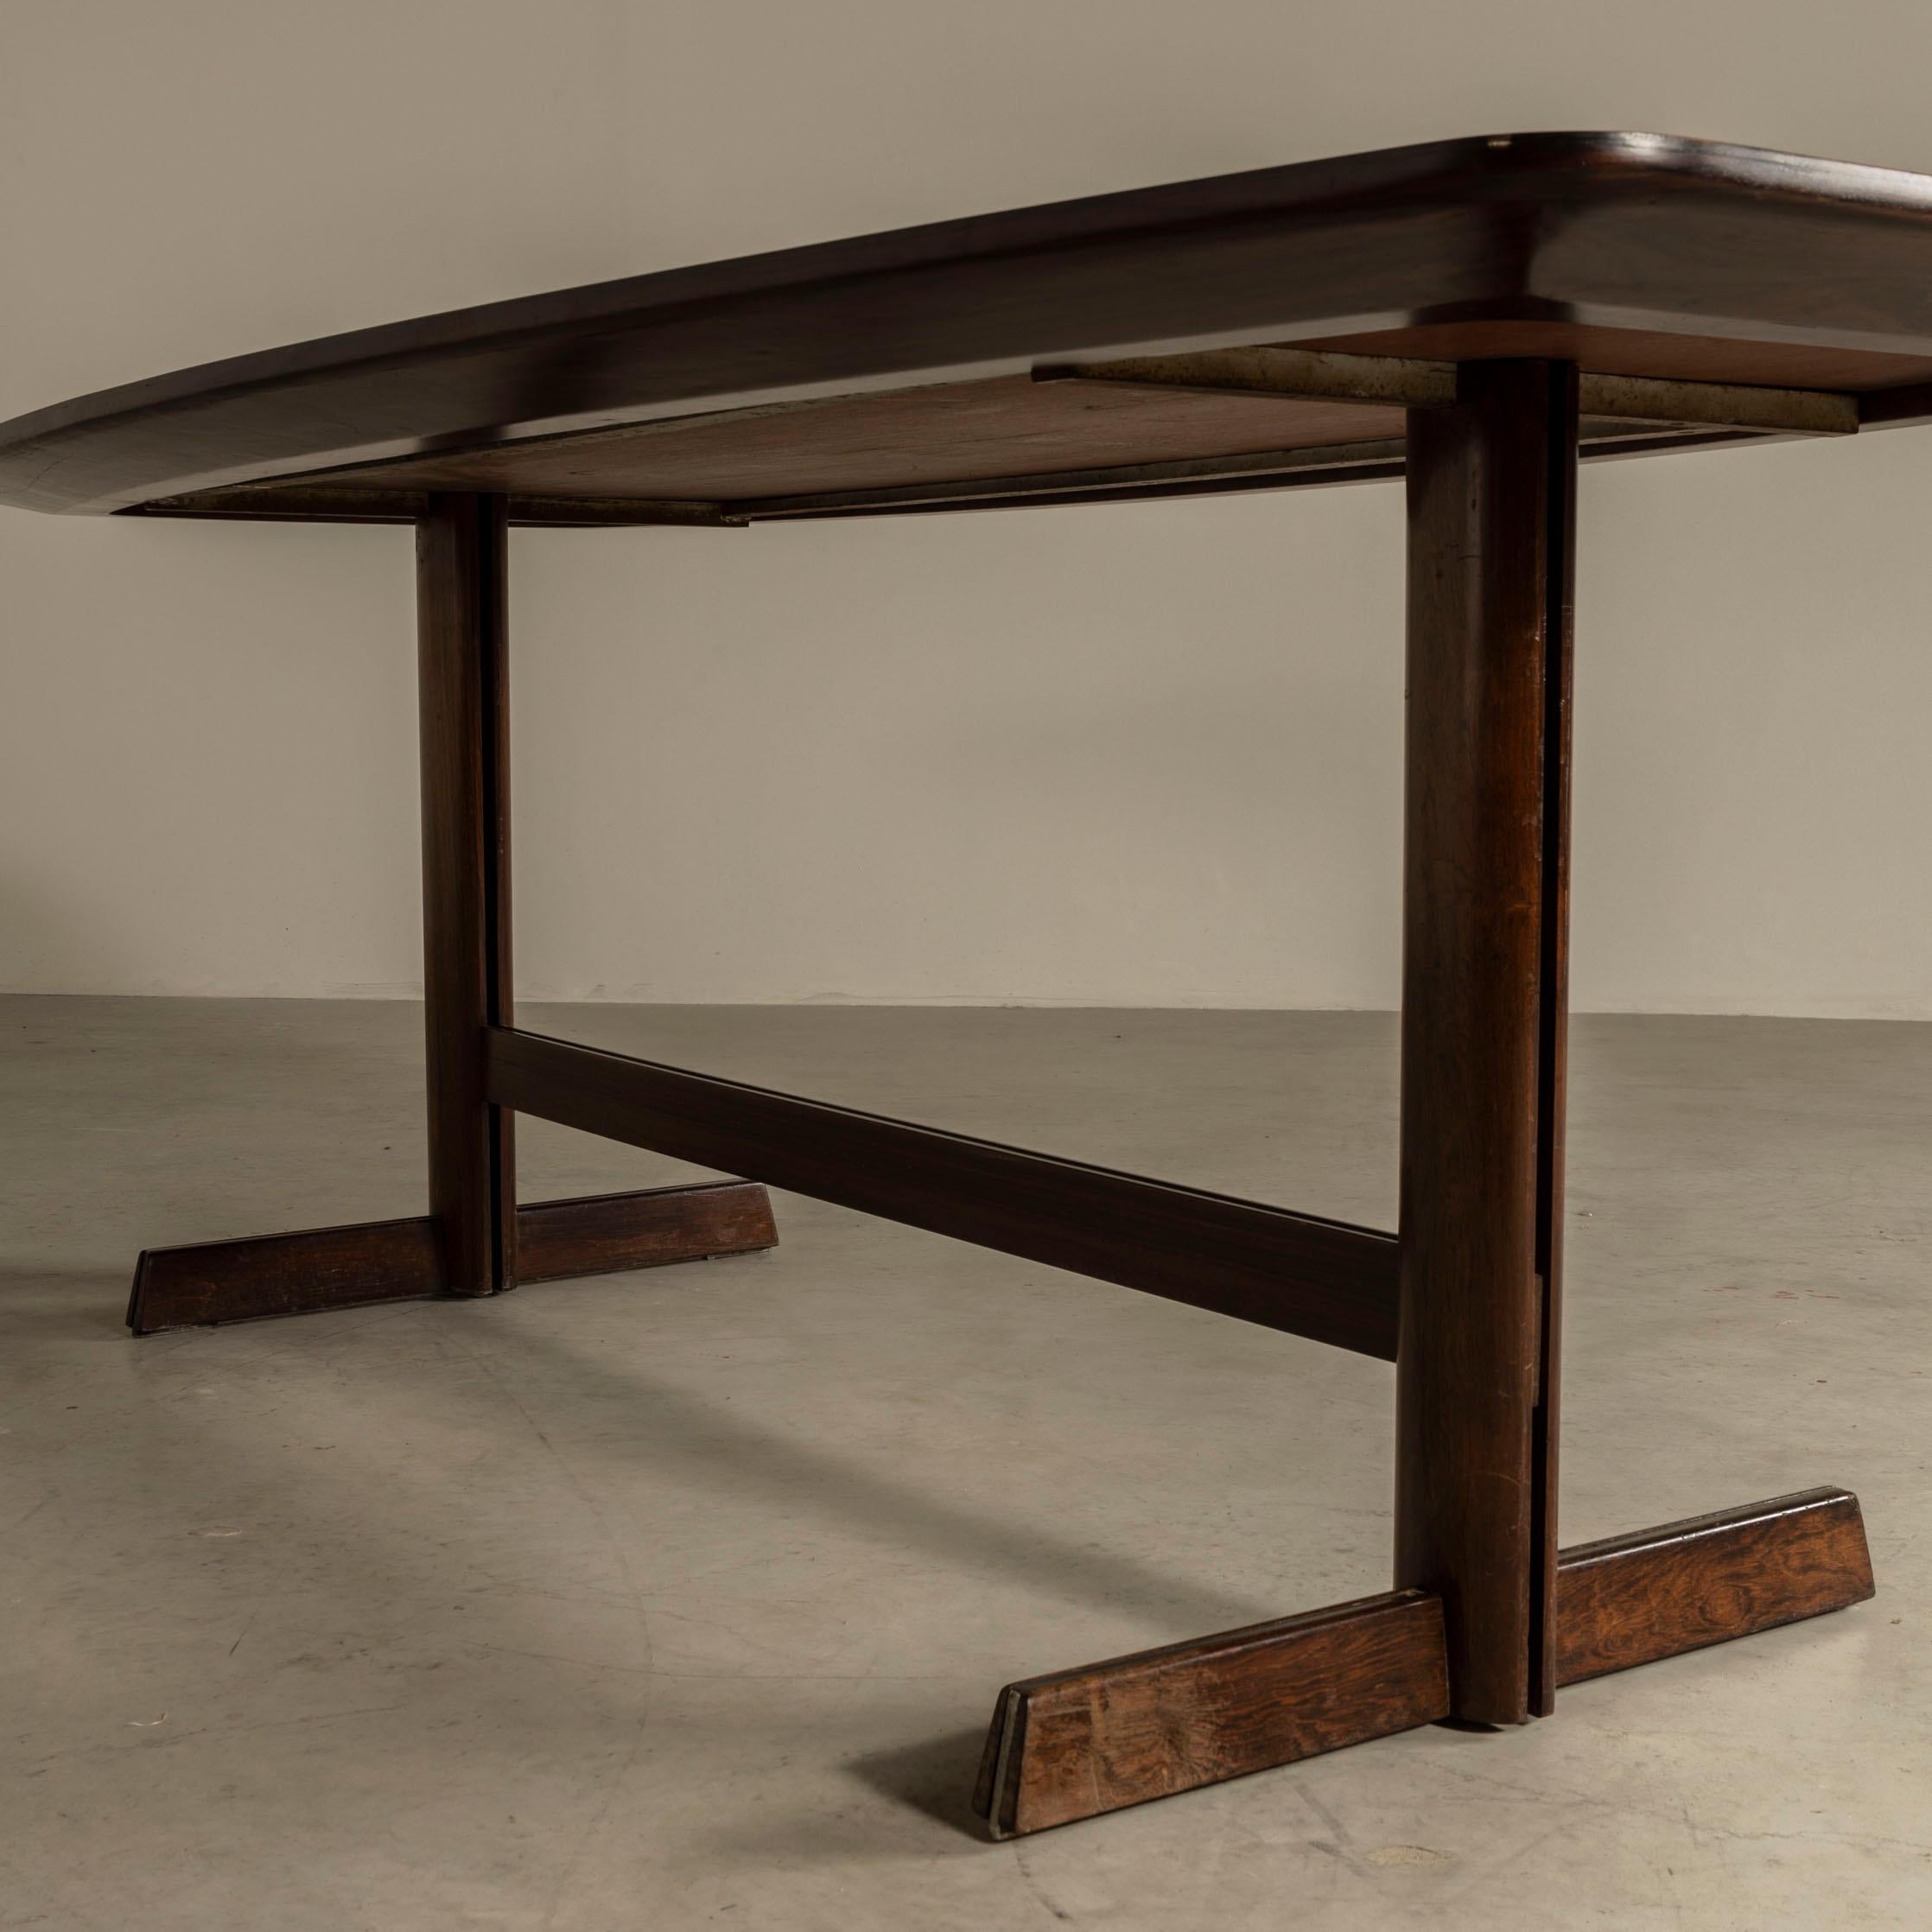 Rare Dining Table in Hardwood, by L'atelier, Brazilian Mid-Century Modern For Sale 1